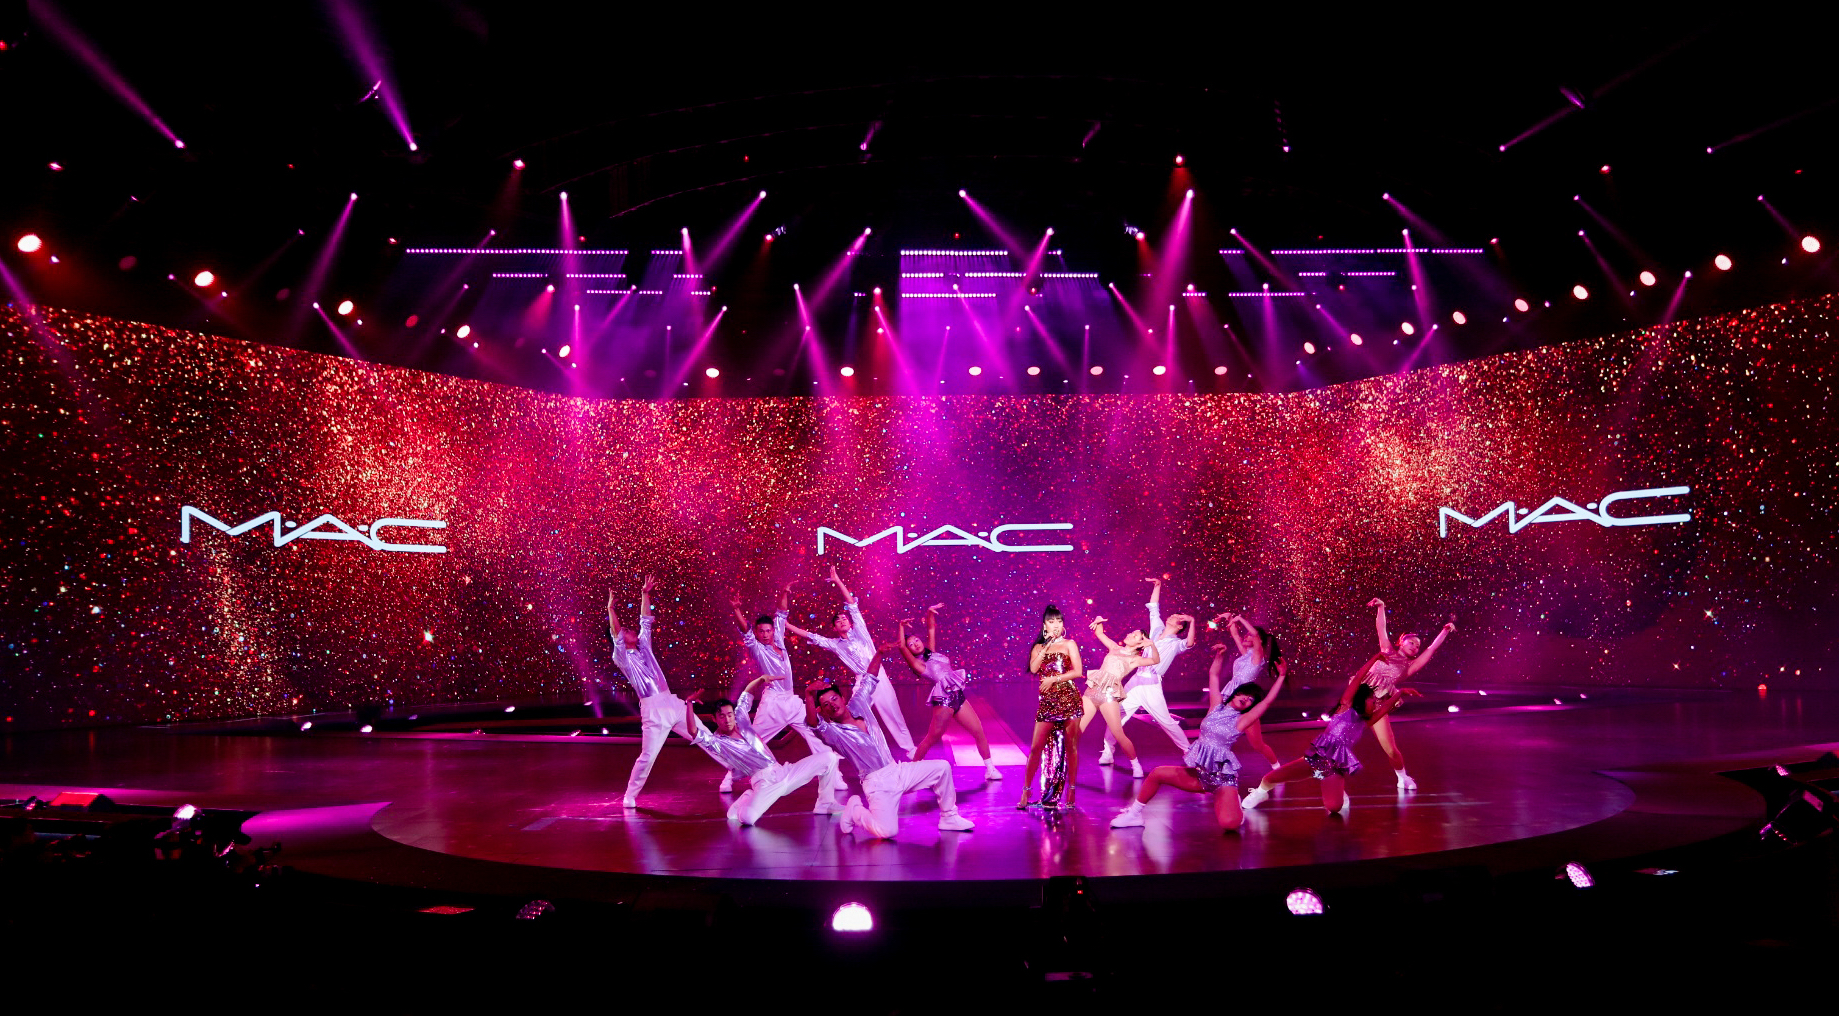 Mac performance at Tmall Collection_10212019 copy